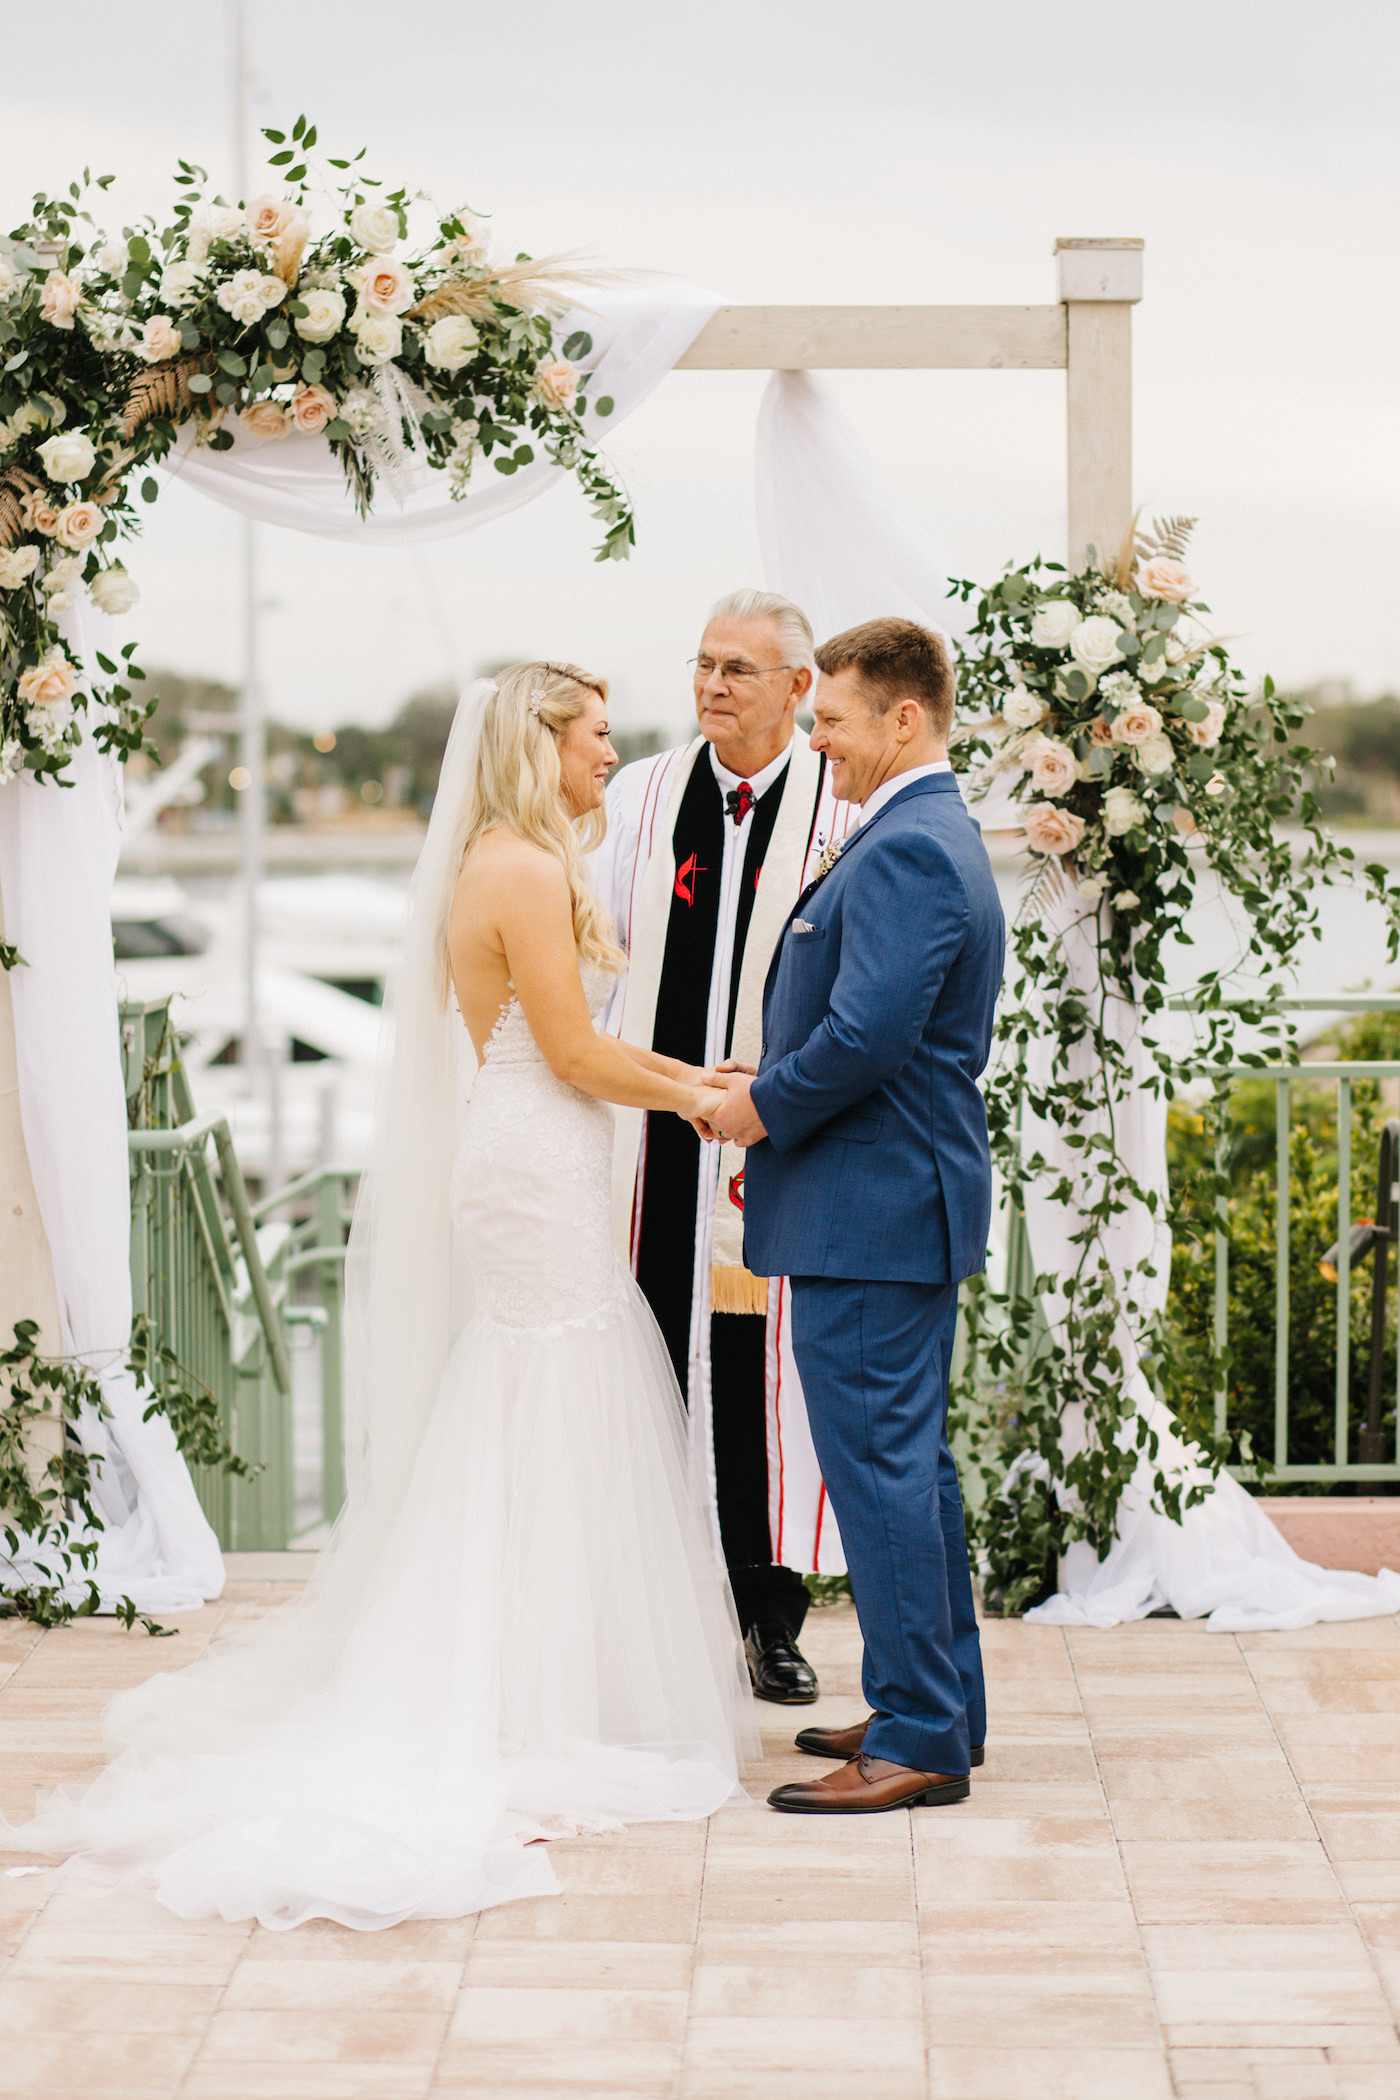 Boho Chic Inspired Wedding Ceremony, Florida Bride and Groom Hold Hands in Outdoor Waterfront Vow Exchange, Ashley Stegbauer Morrison Wearing Modern Ines Di Santo Wedding Dress, White Lace and Tulle Fit and Flare with Plunging Neckline, Altar Decorated in Boho Chic Inspired Ivory Flowers and Blush Pink Roses, Pampas Grass with Greenery, White Wooden Arch with Draping | Downtown St. Pete Wedding Planner Parties A’ La Carte | Luxury Florida Wedding and Bridal Dress Shop Isabel O’Neil Bridal Collection | Wedding Venue The Esplanade Location of the Vinoy Renaissance Resort in Downtown St. Petersburg | Rentals Over the Top Linen Rentals